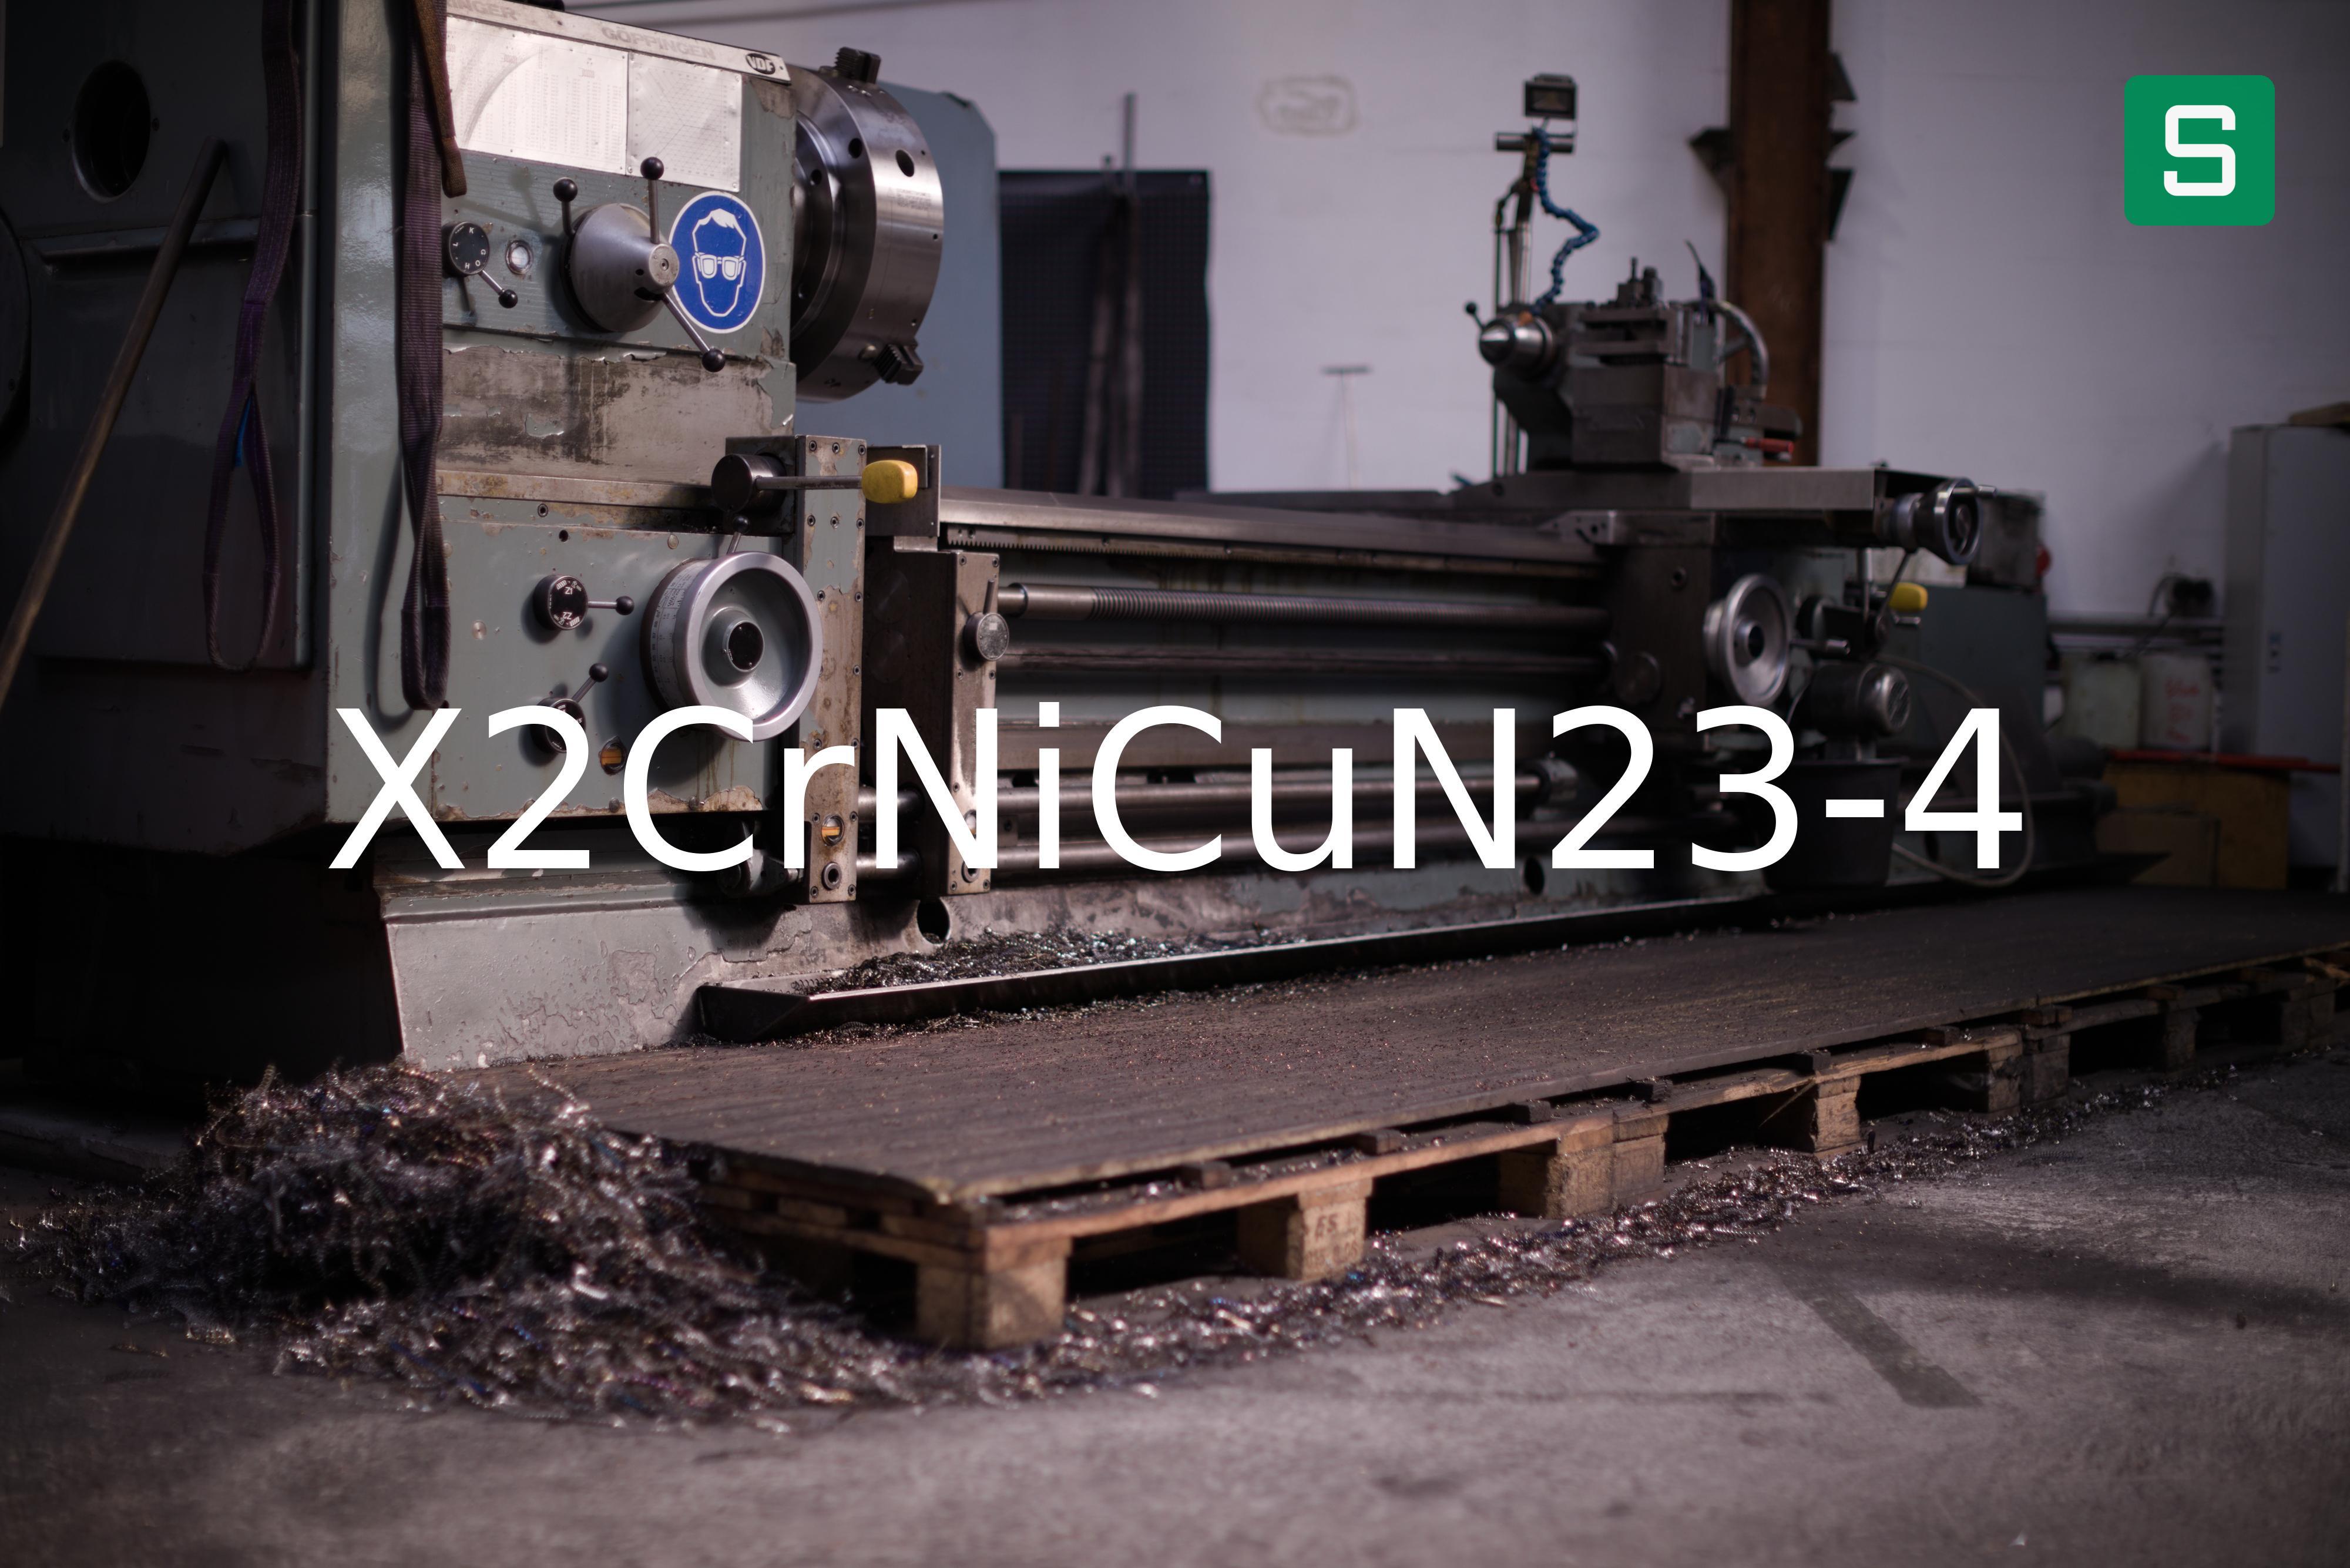 Steel Material: X2CrNiCuN23-4